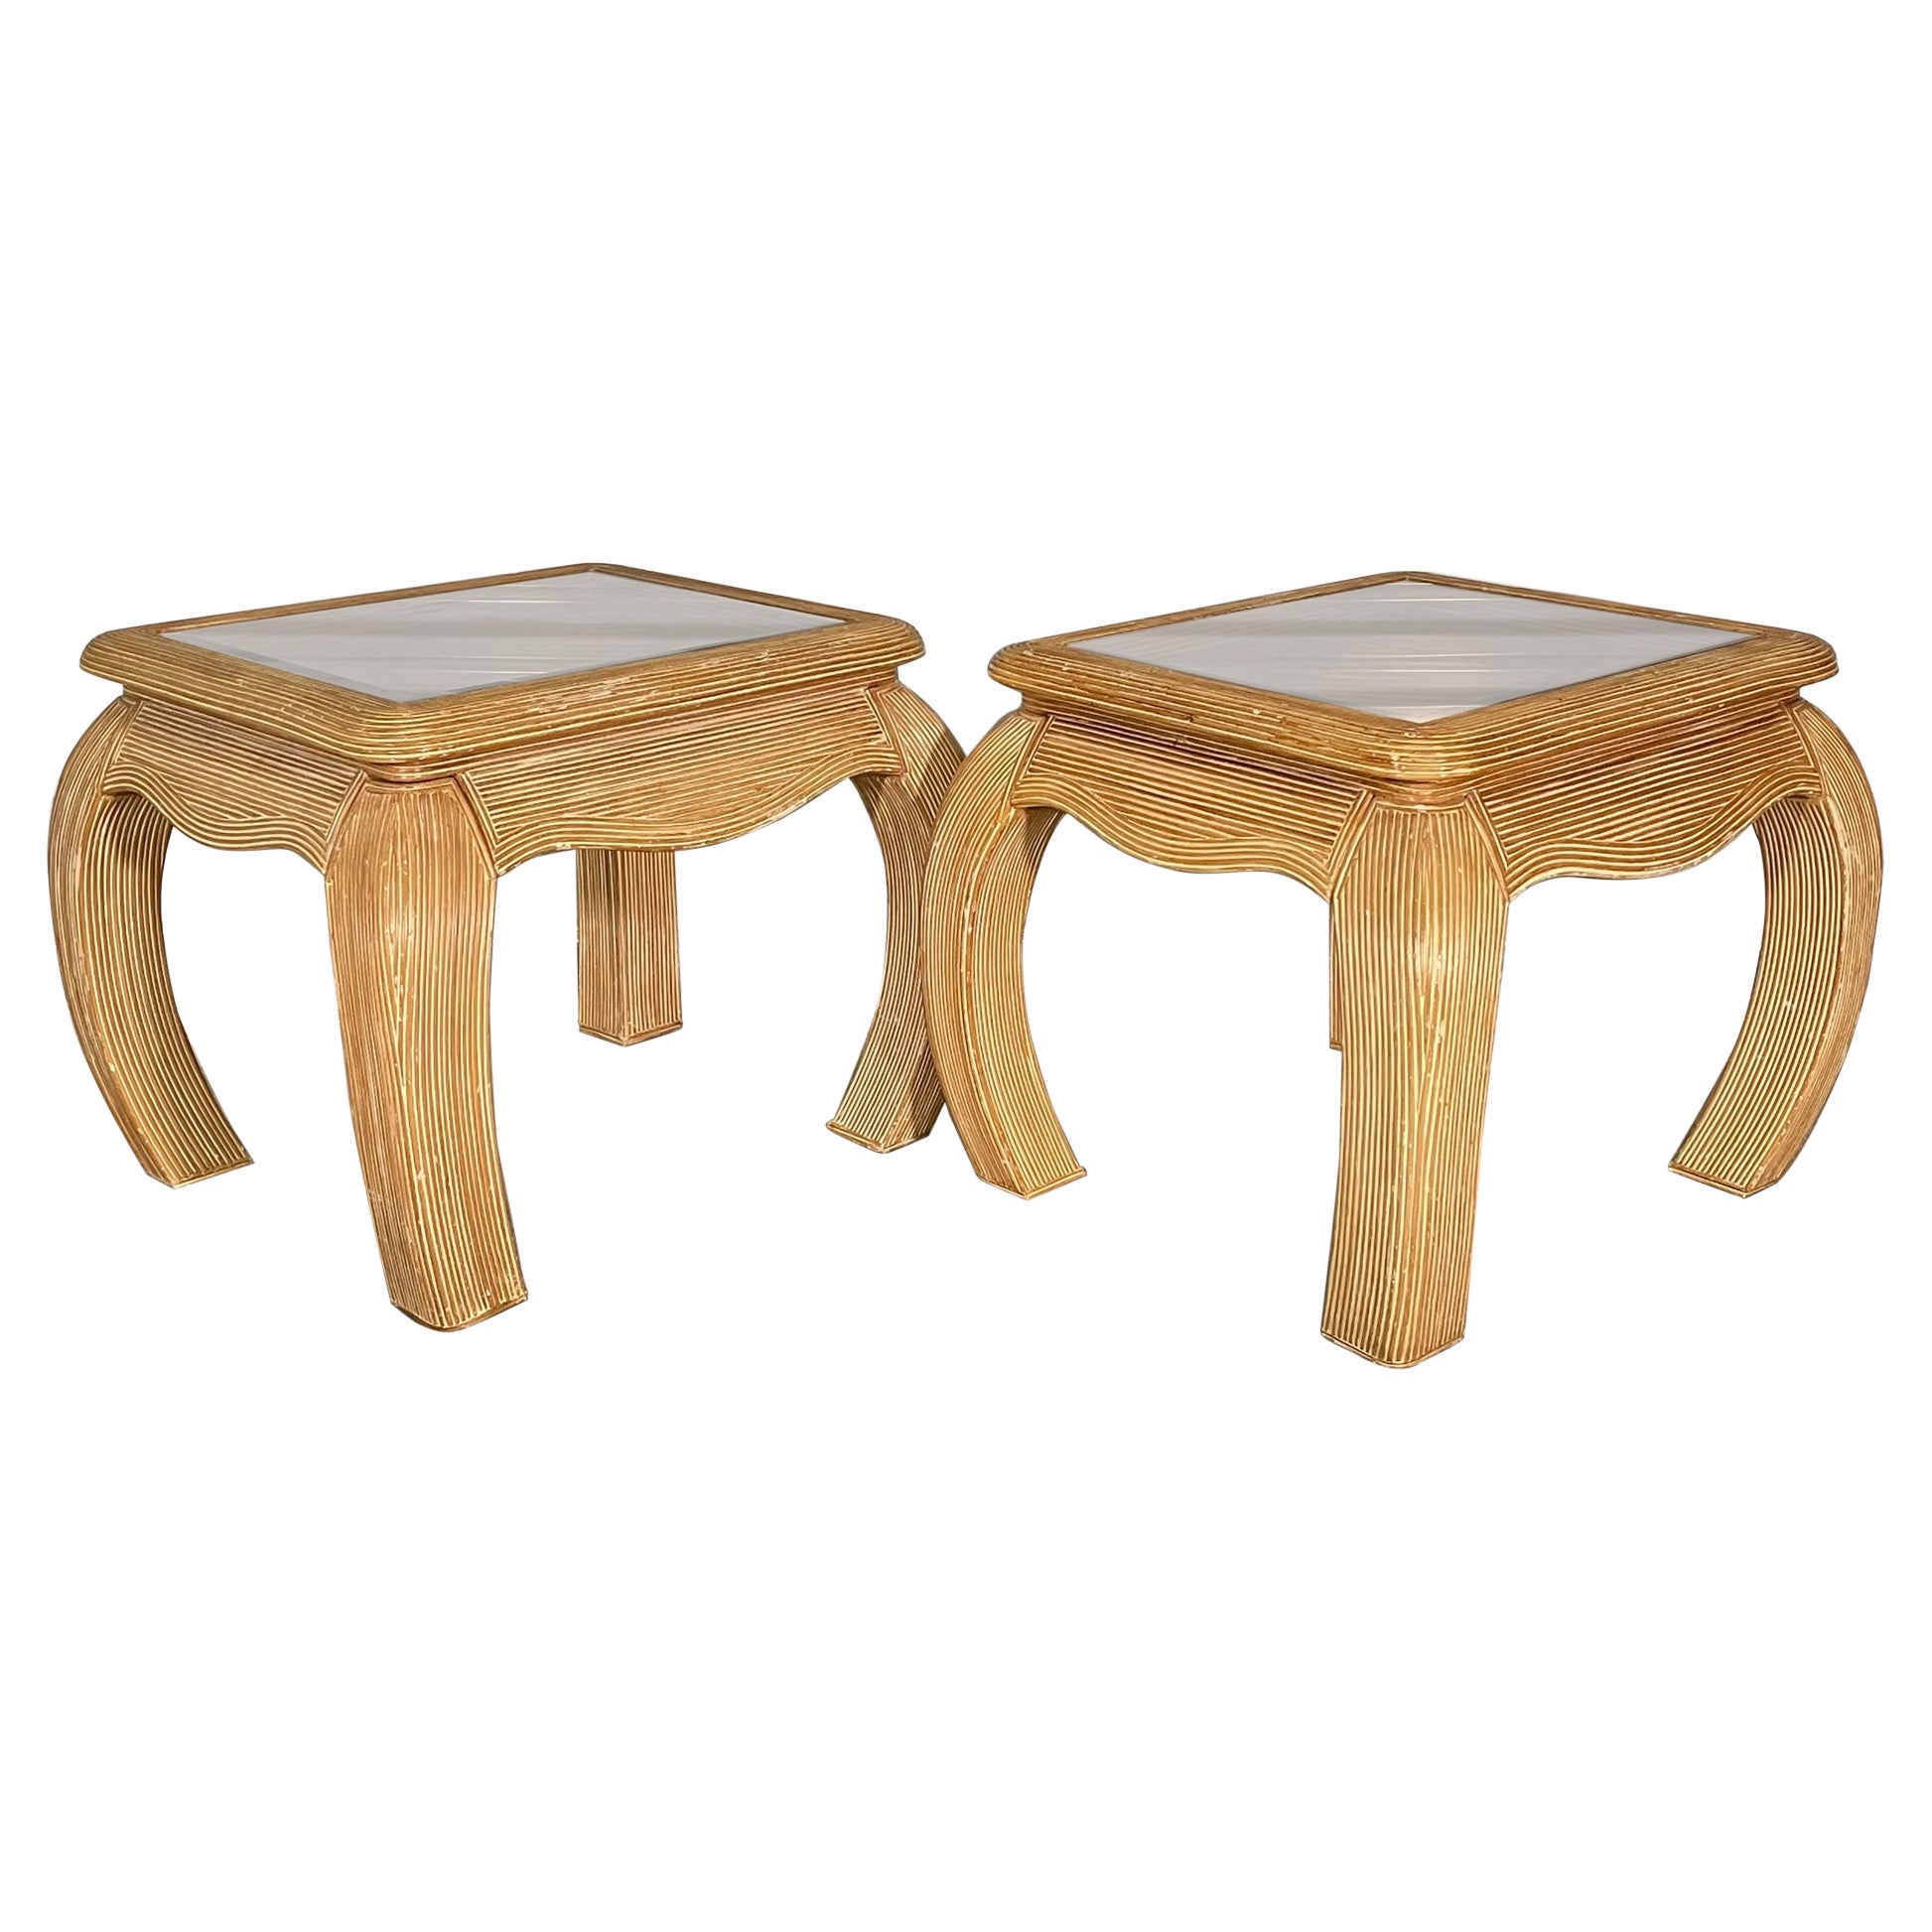 Pencil Reed Rattan Ming Asian End Tables